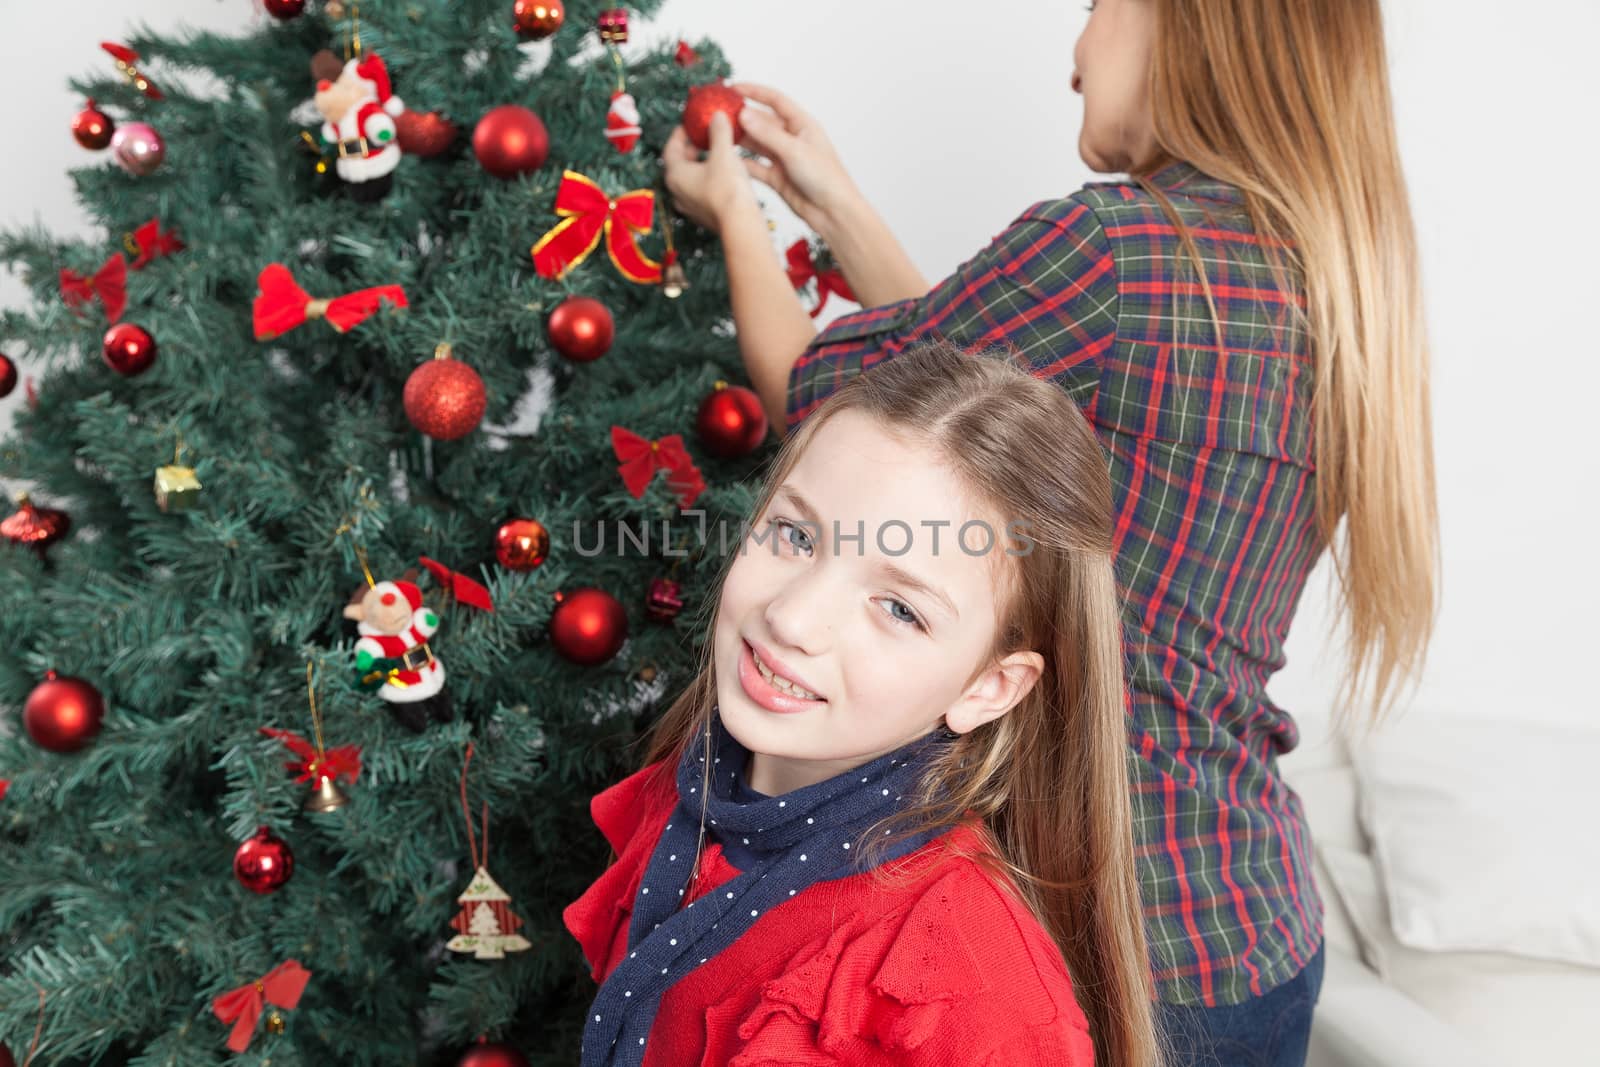 8-10, at, beautiful, blonde, blue, camera, caucasian, celebration, christmas, cute, december, event, eyes, girl, green, happy, holiday, look, looking, merry, model, new, old, people, person, portrait, pretty, property, pullover, red, releases, smile, tradition, traditional, horizontal, winter, xmas, year, years, young